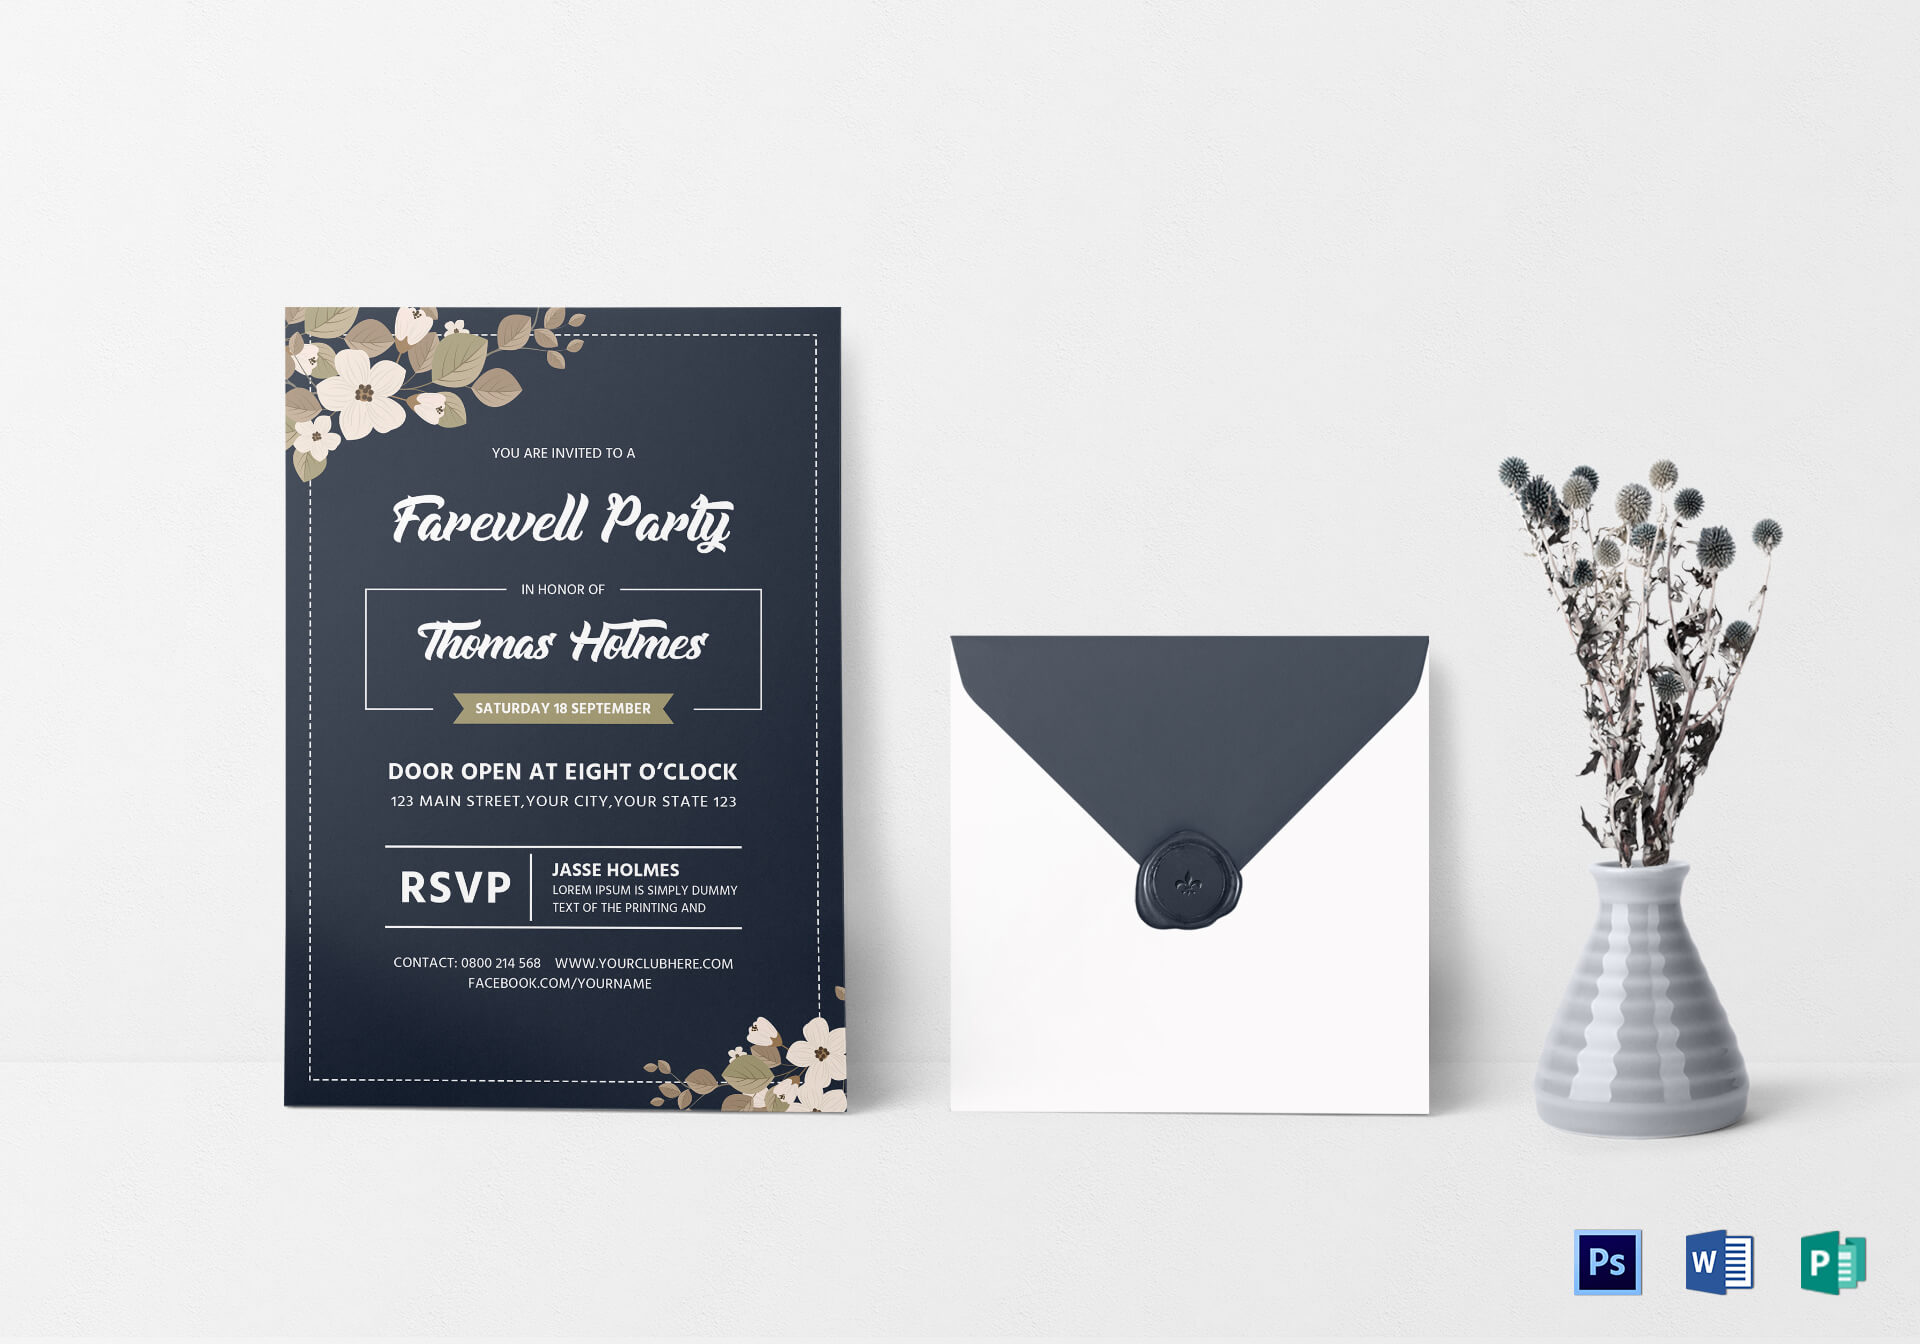 Farewell Party Invitation Card Template Throughout Farewell Card Template Word